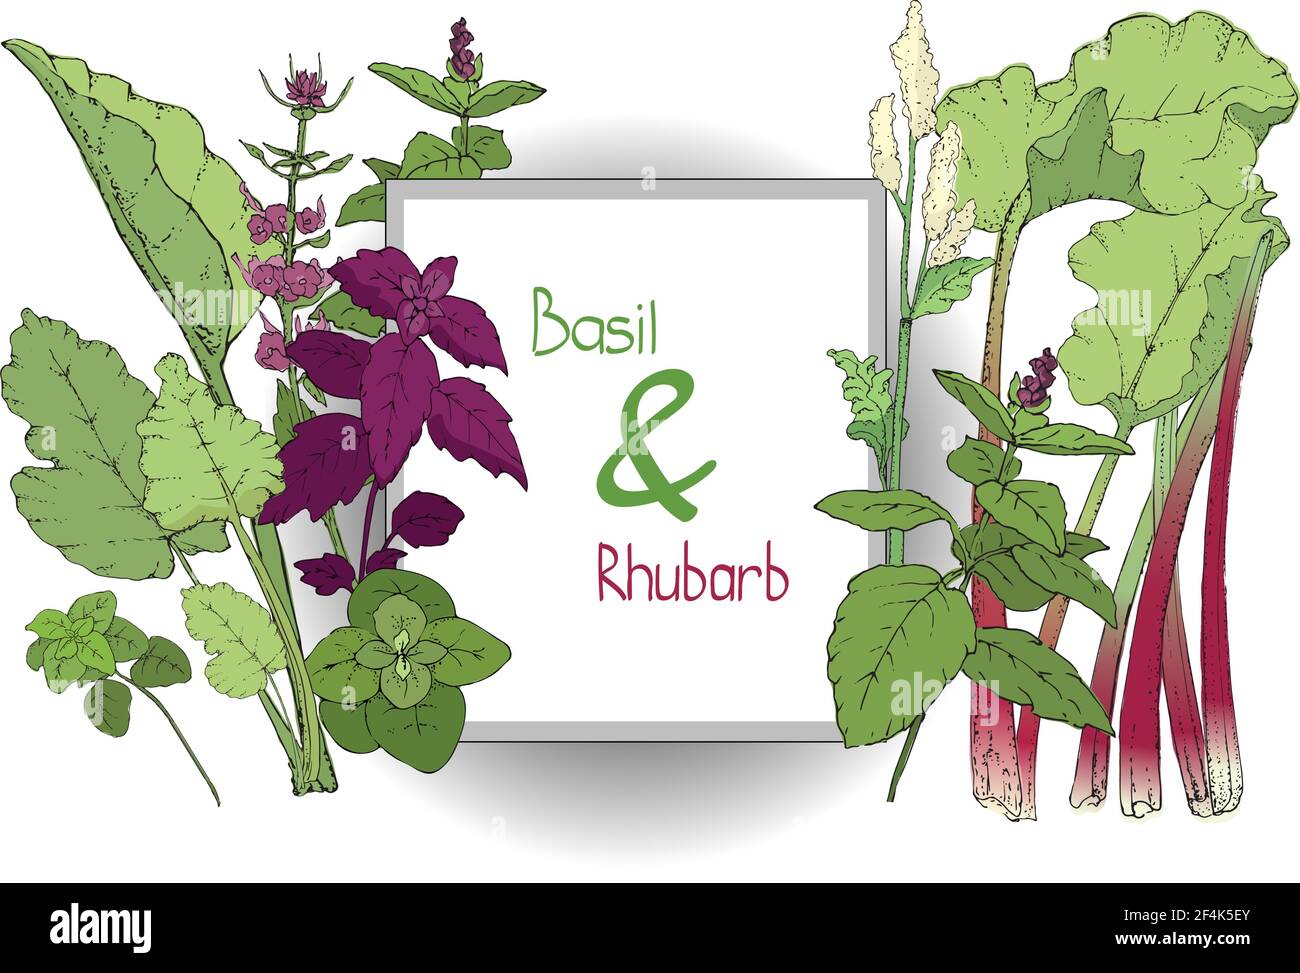 Vector set of basil plant and rhubarb. Green and purple cinnamon and Italian basil with leaves and flowers. Fresh pieplant with green leaves Stock Vector